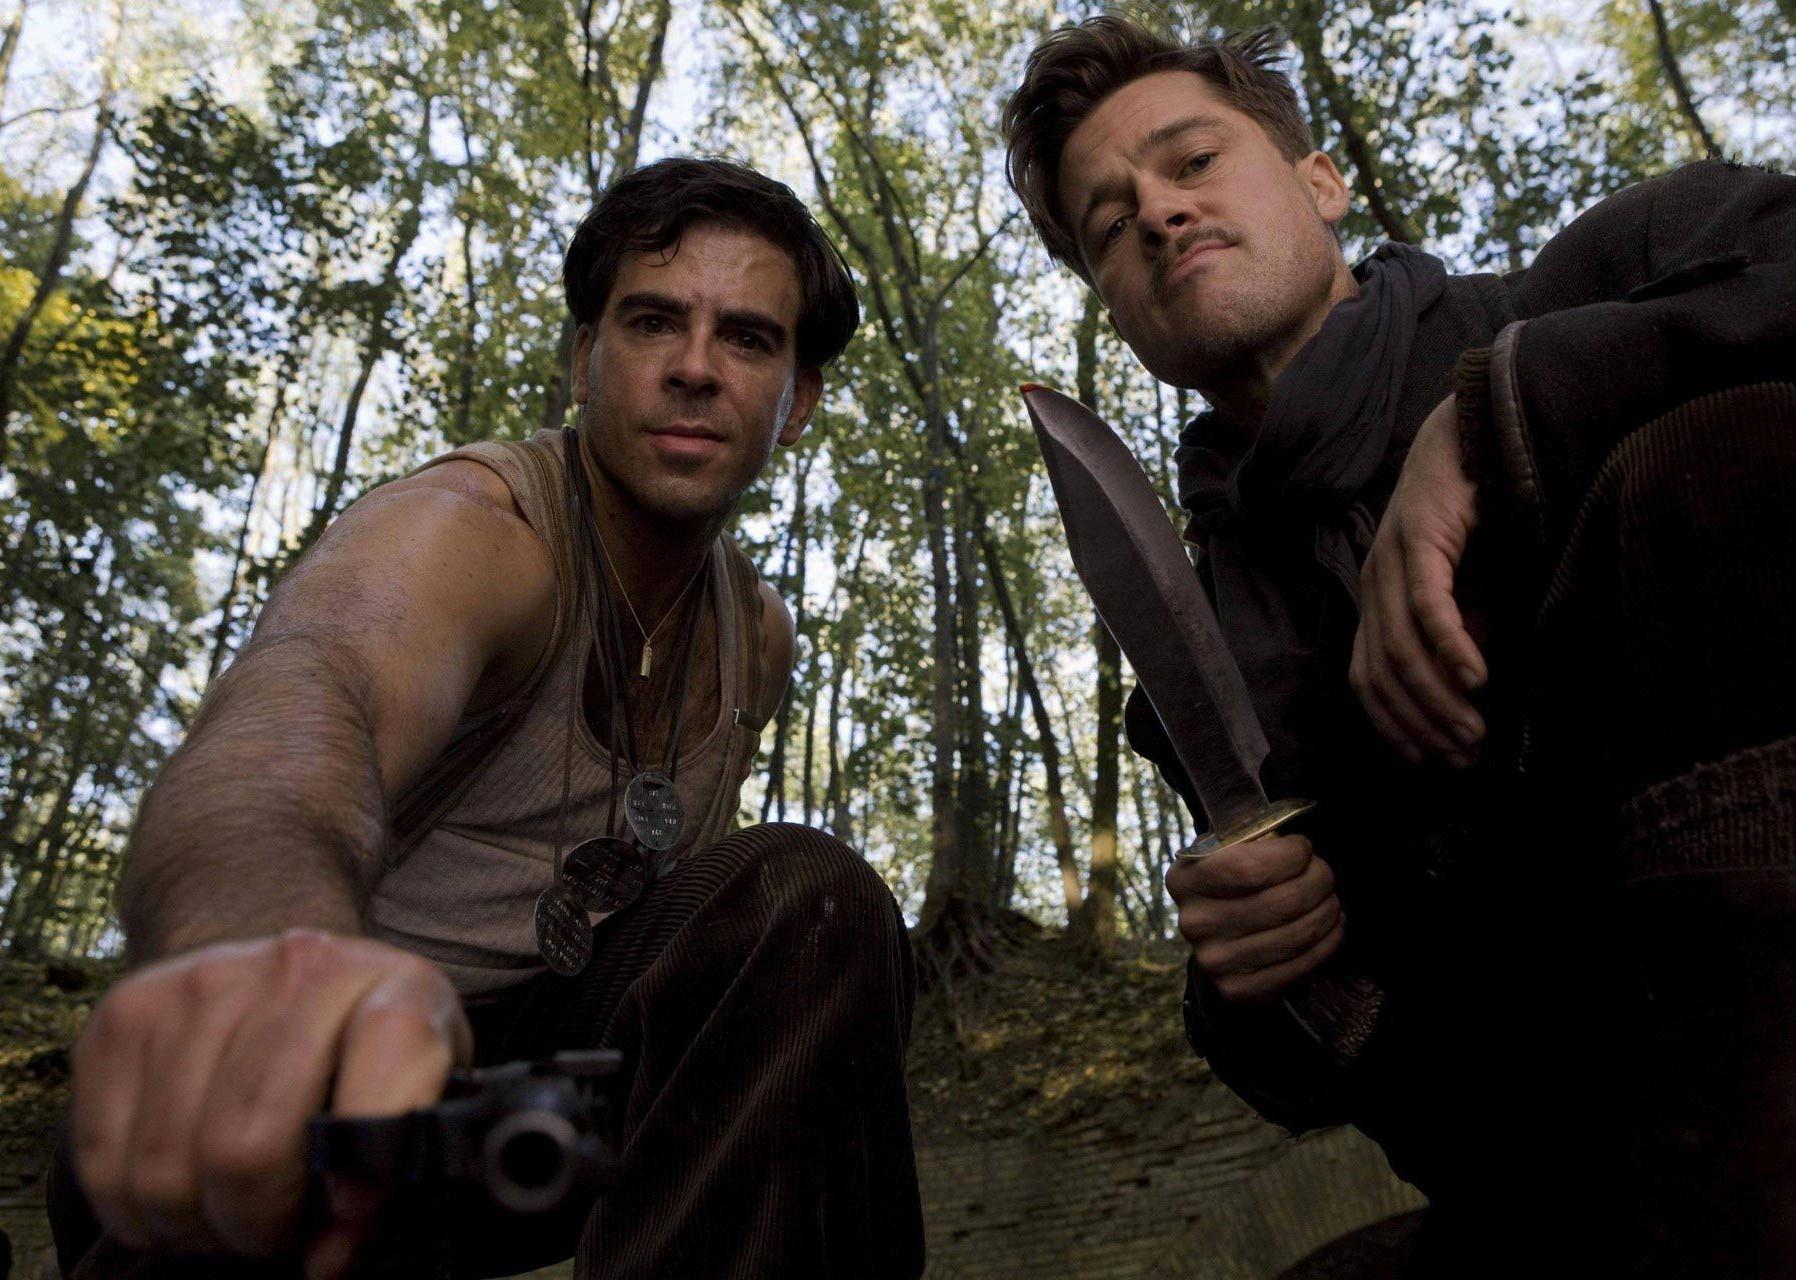 Brad Pitt and Eli Roth holding a gun and knife on someone.